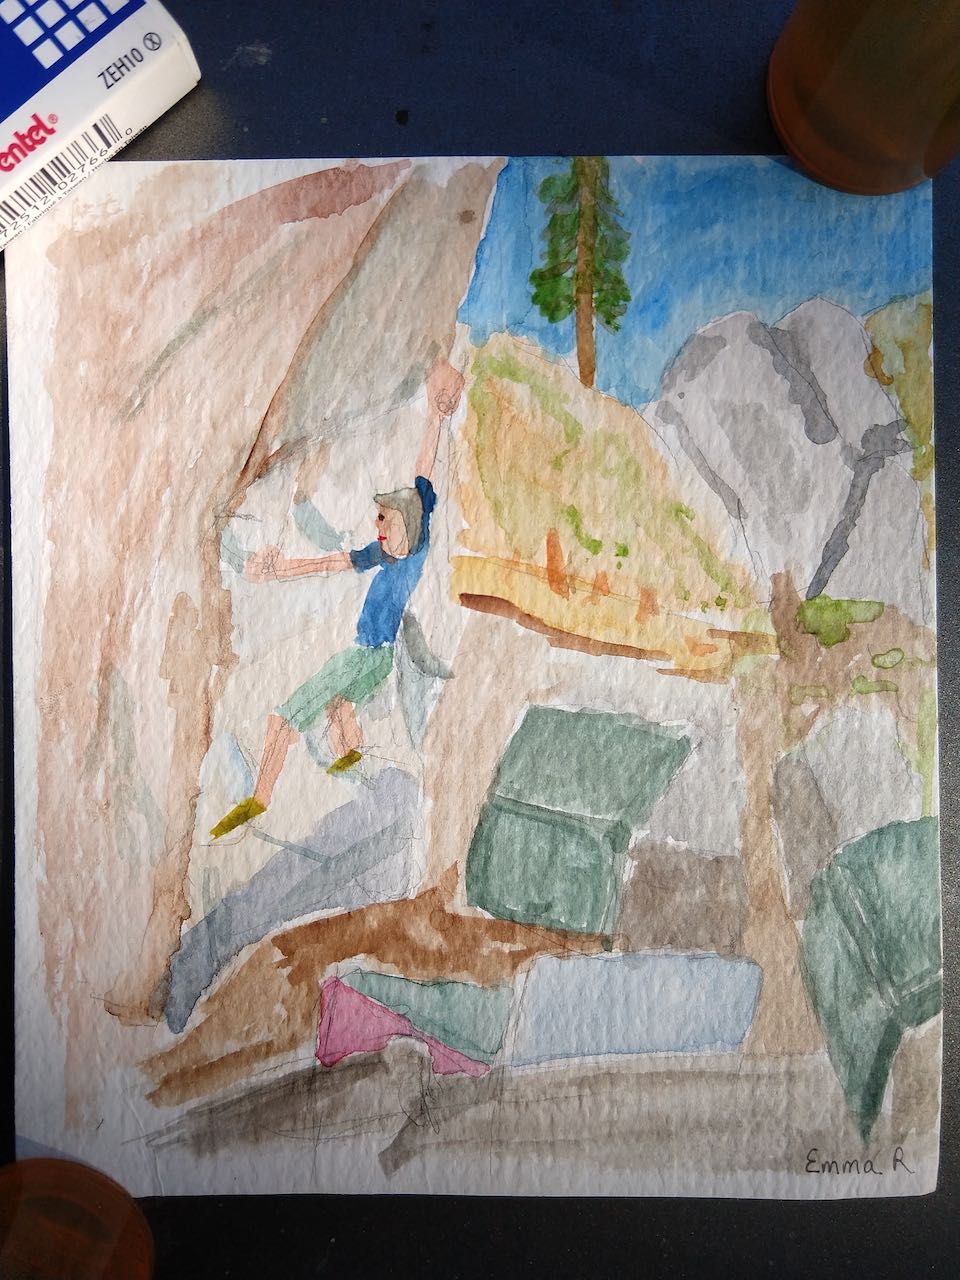 Watercolor of a climber on The Undercling, Hole Boulder, Leavenworth, WA